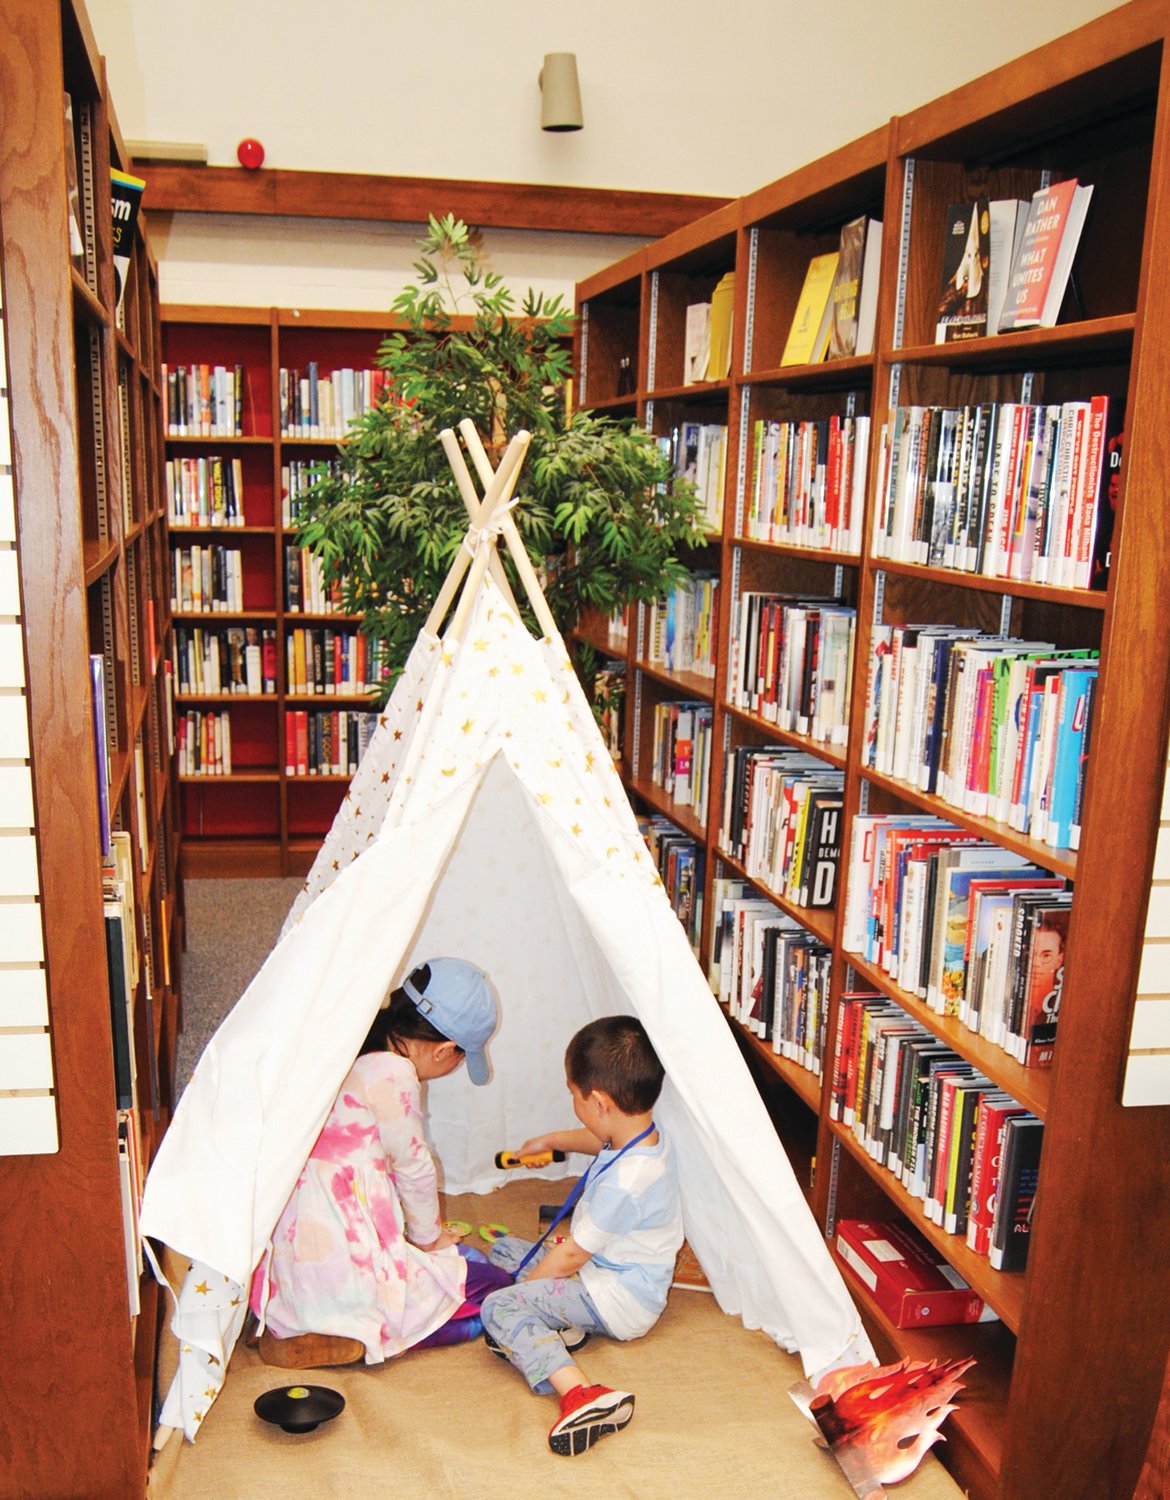 Children go “camping” in the stacks at the Warminster Free Library’s Camp Read S’more event.